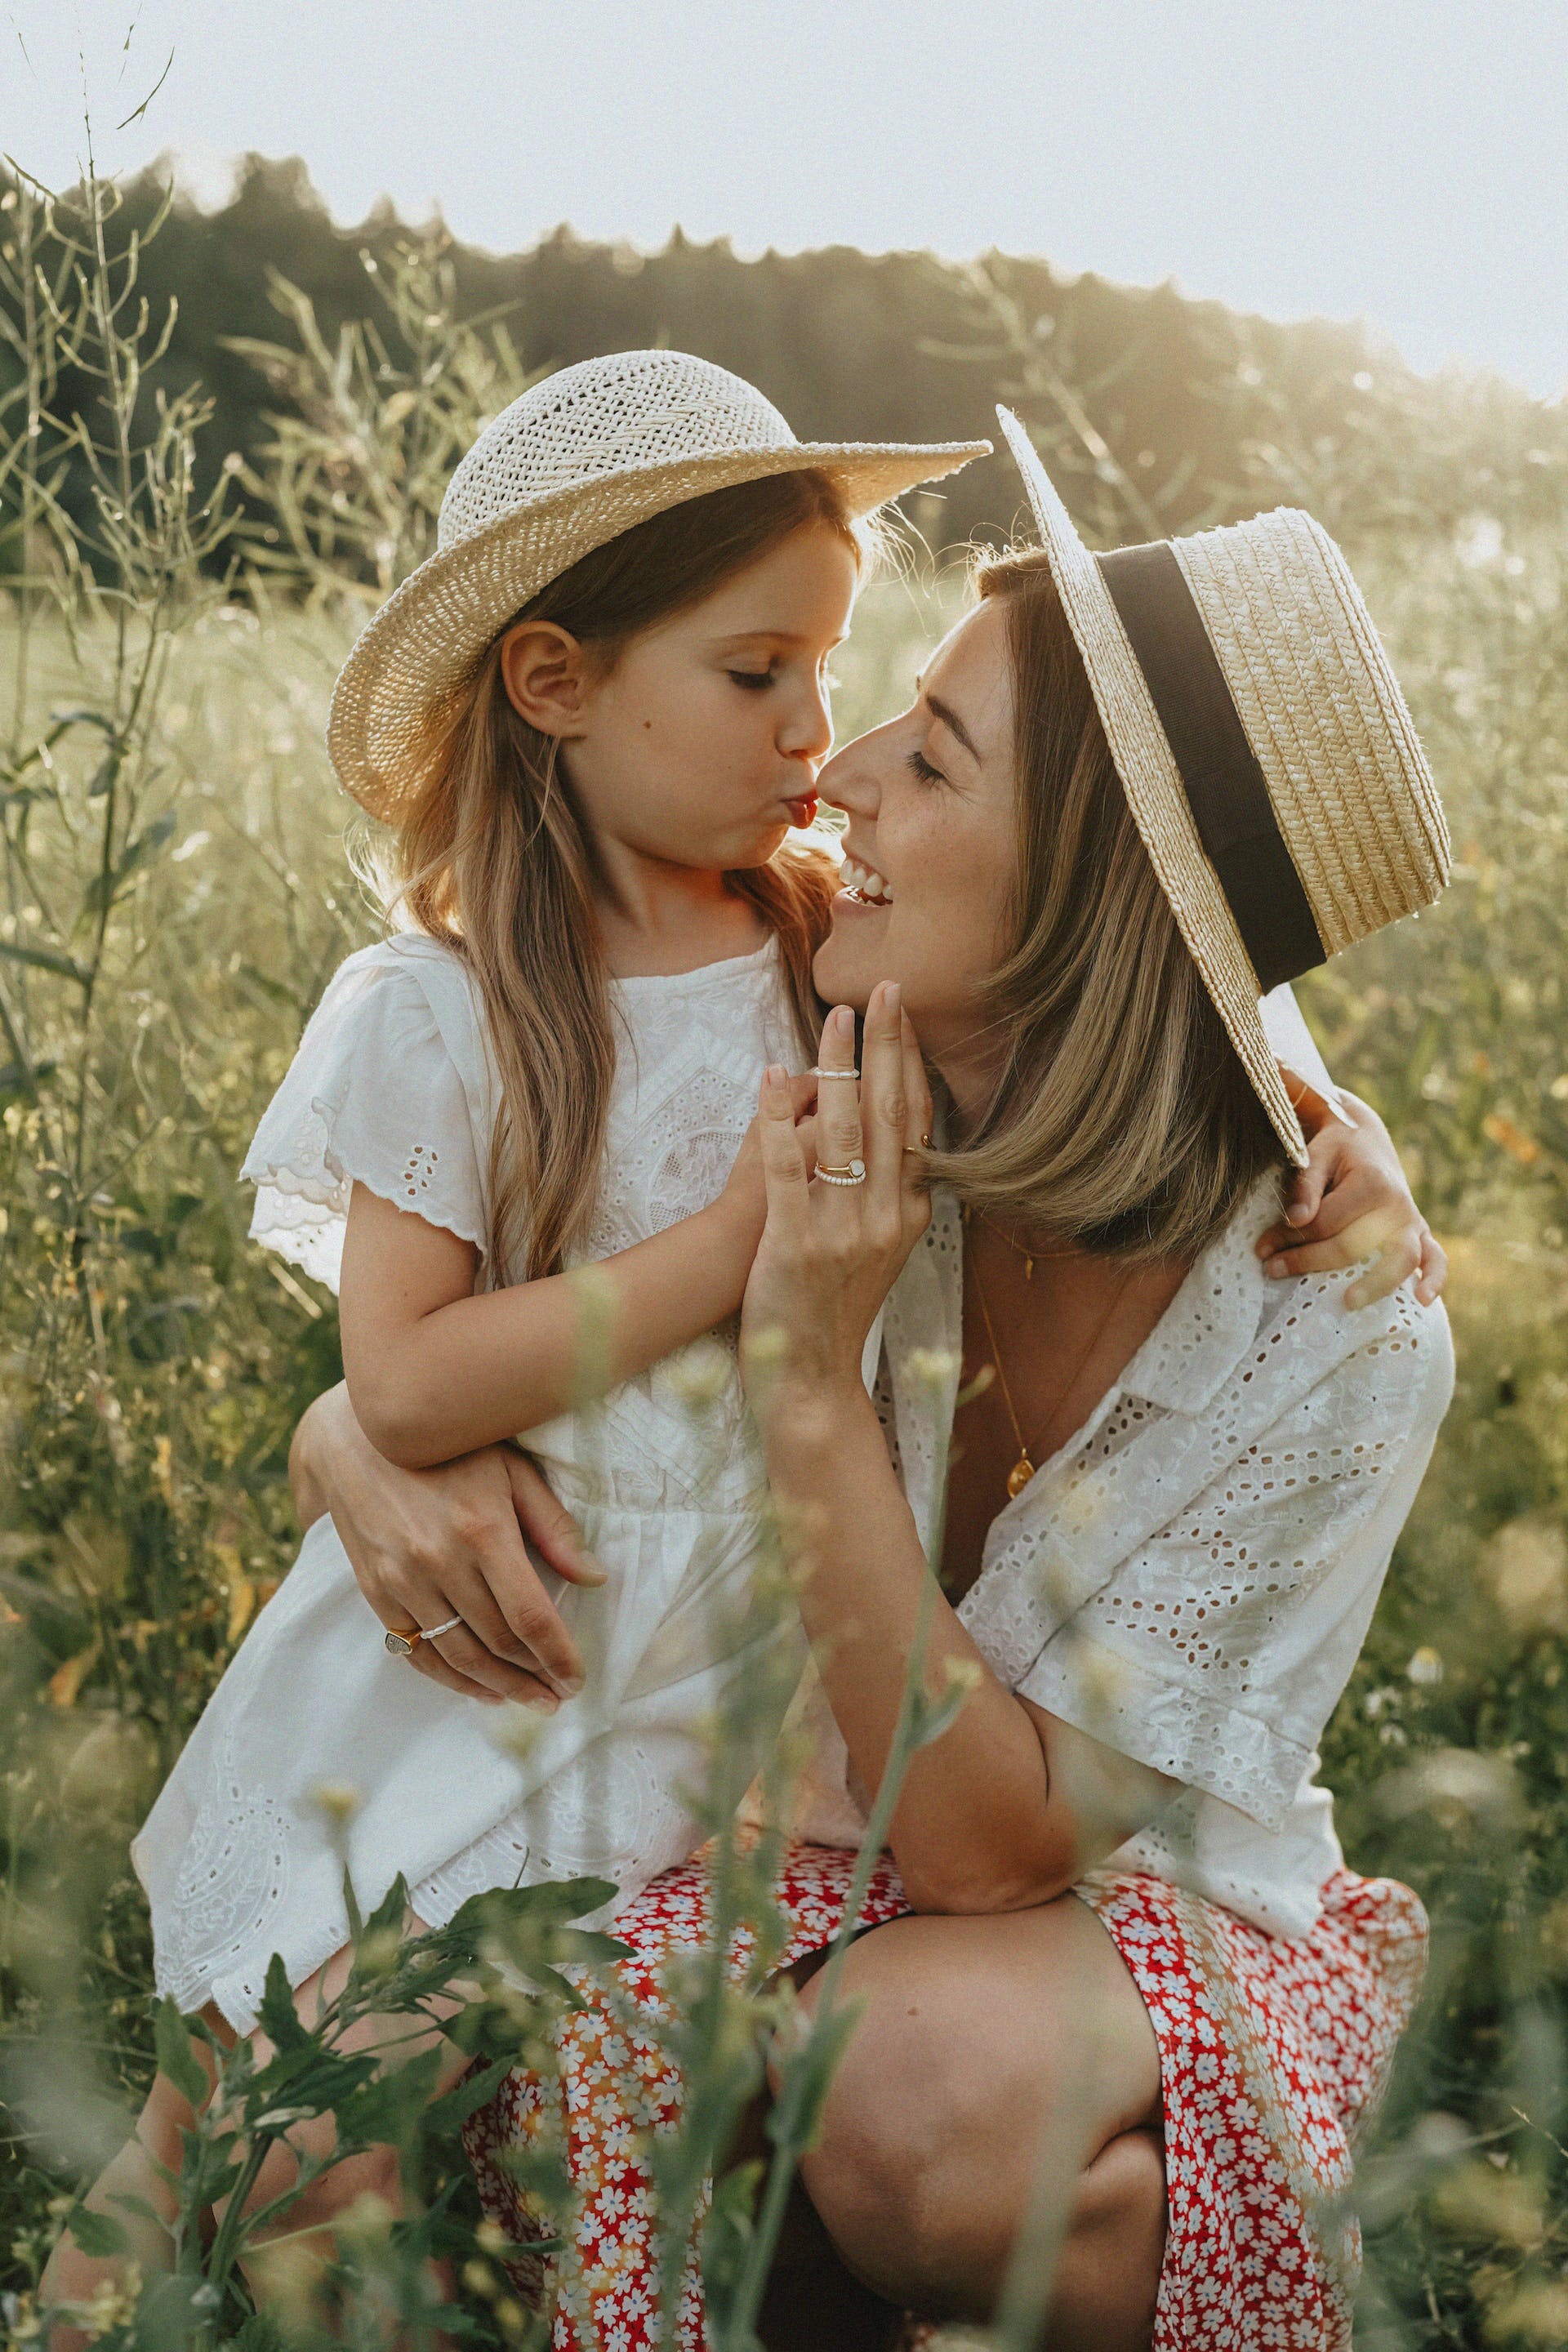 A young girl with her mother in a meadow | Source: Pexels